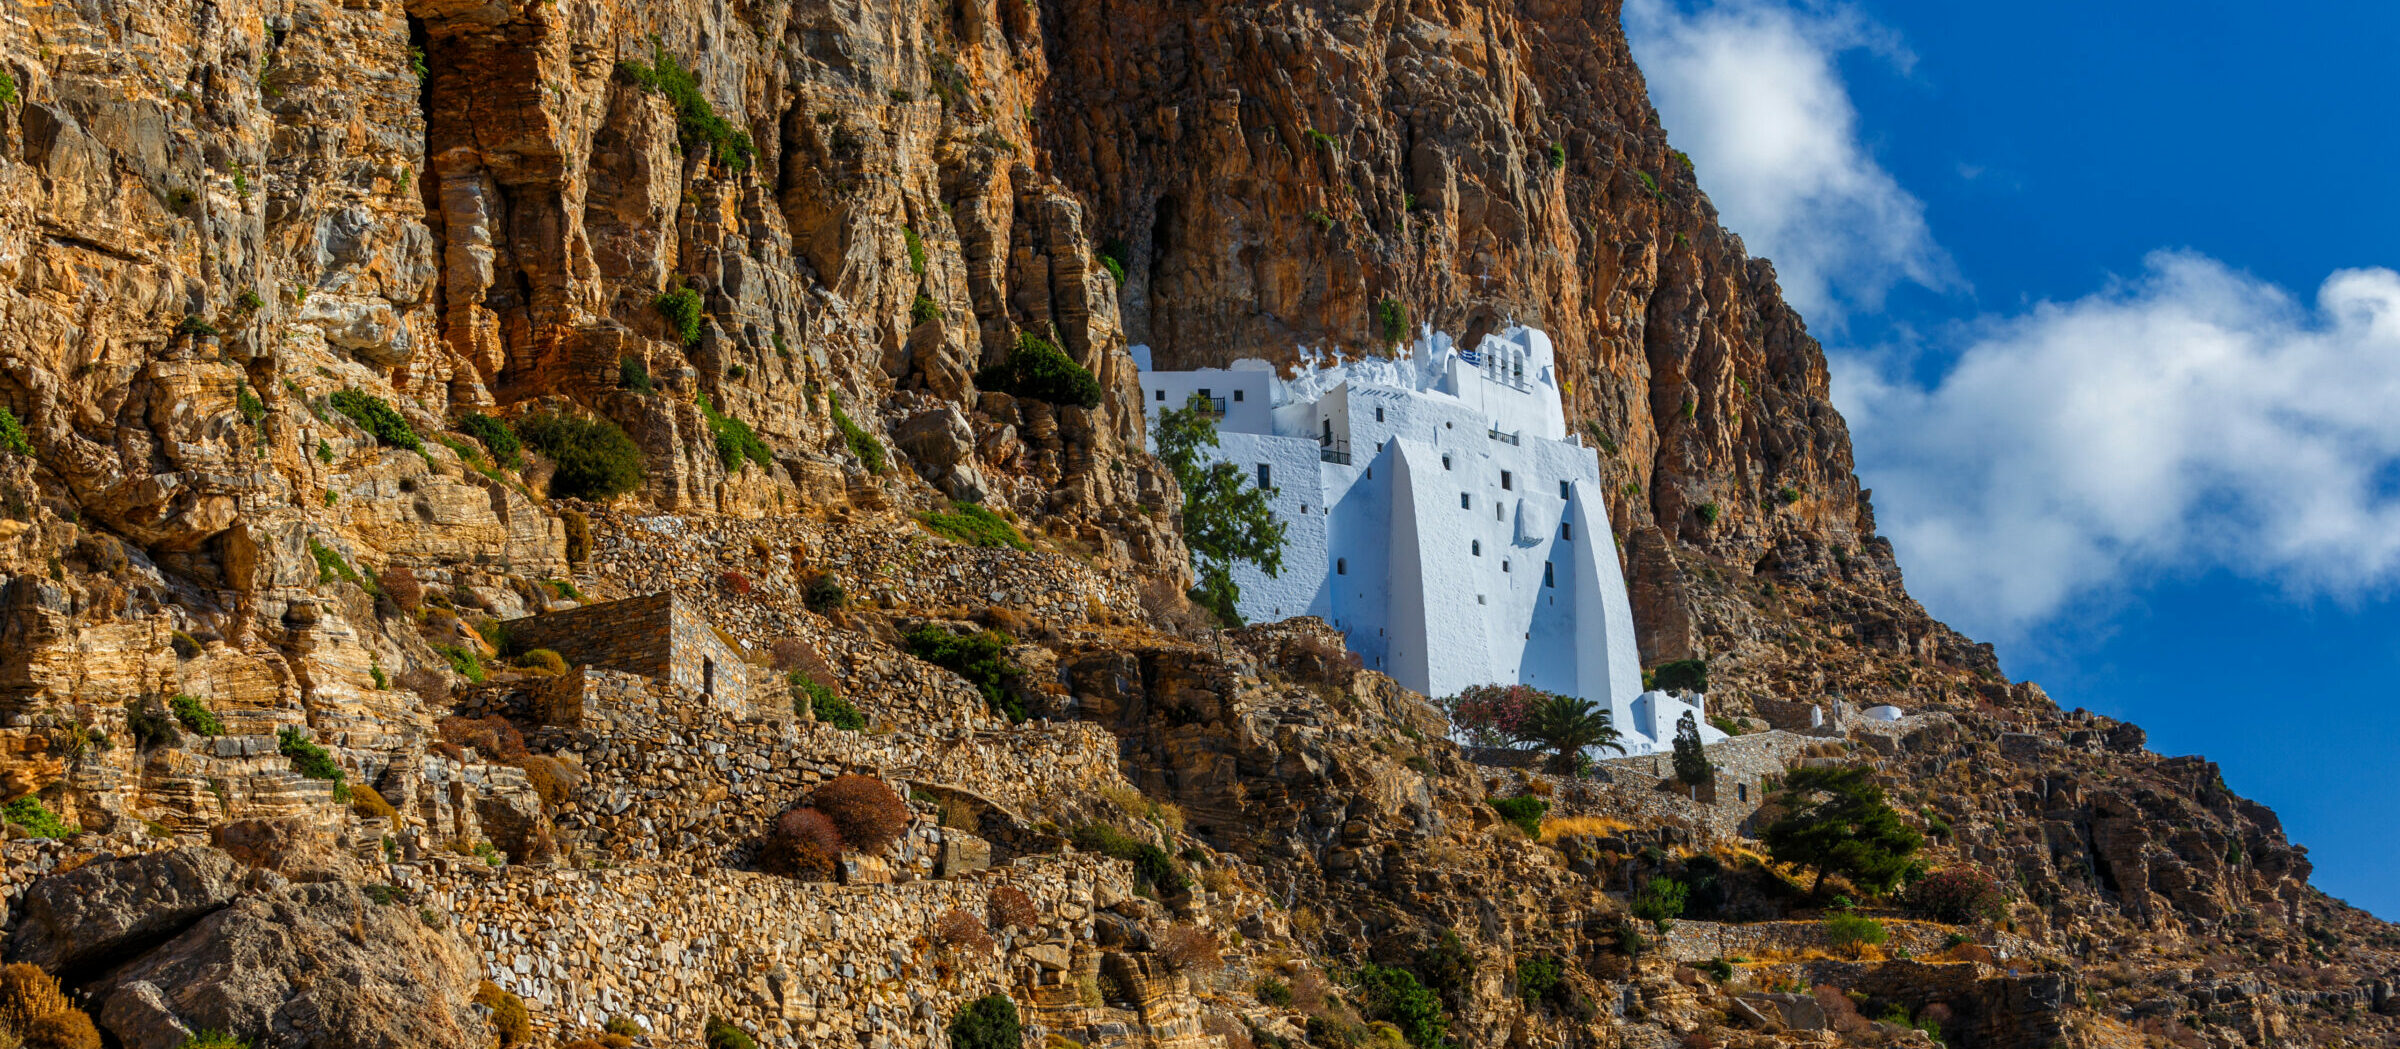 Amorgos: One of the Cyclades’ amazing monasteries